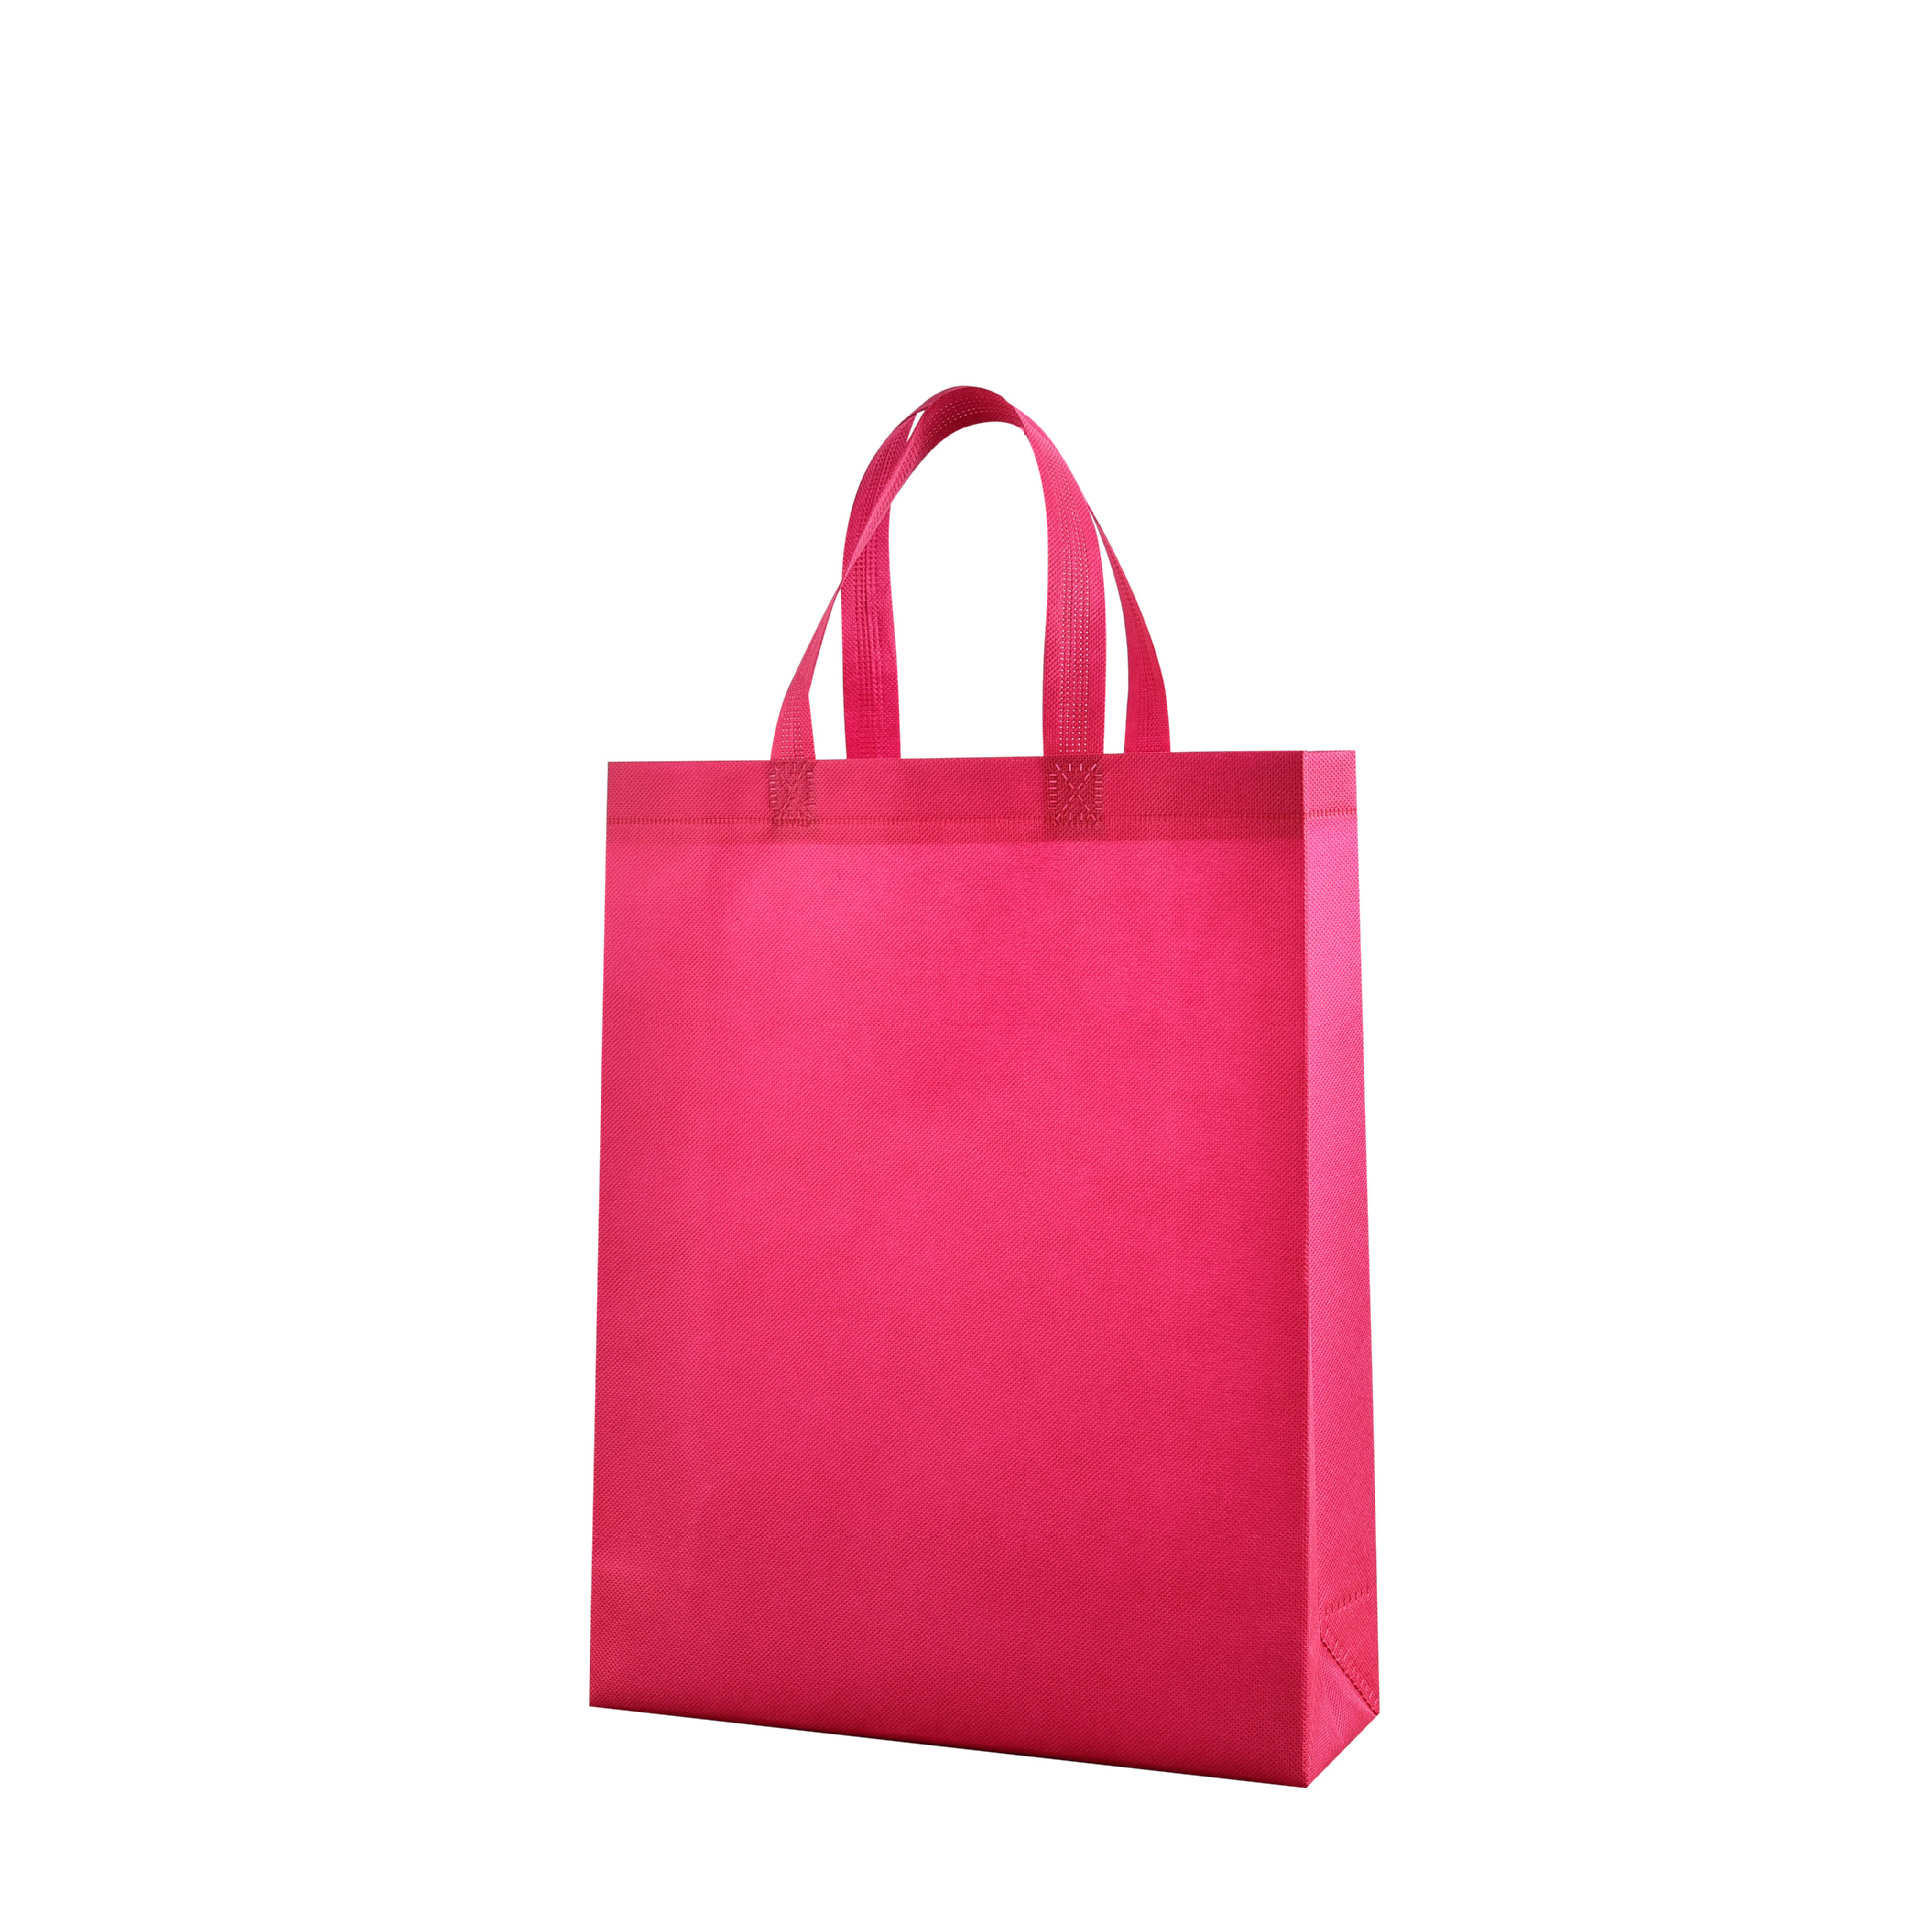 In Stock Non-Woven Bag Film-Covered Advertising Clothing Shopping Bag Printed Logo Three-Dimensional Folding Hand Non-Woven Bag